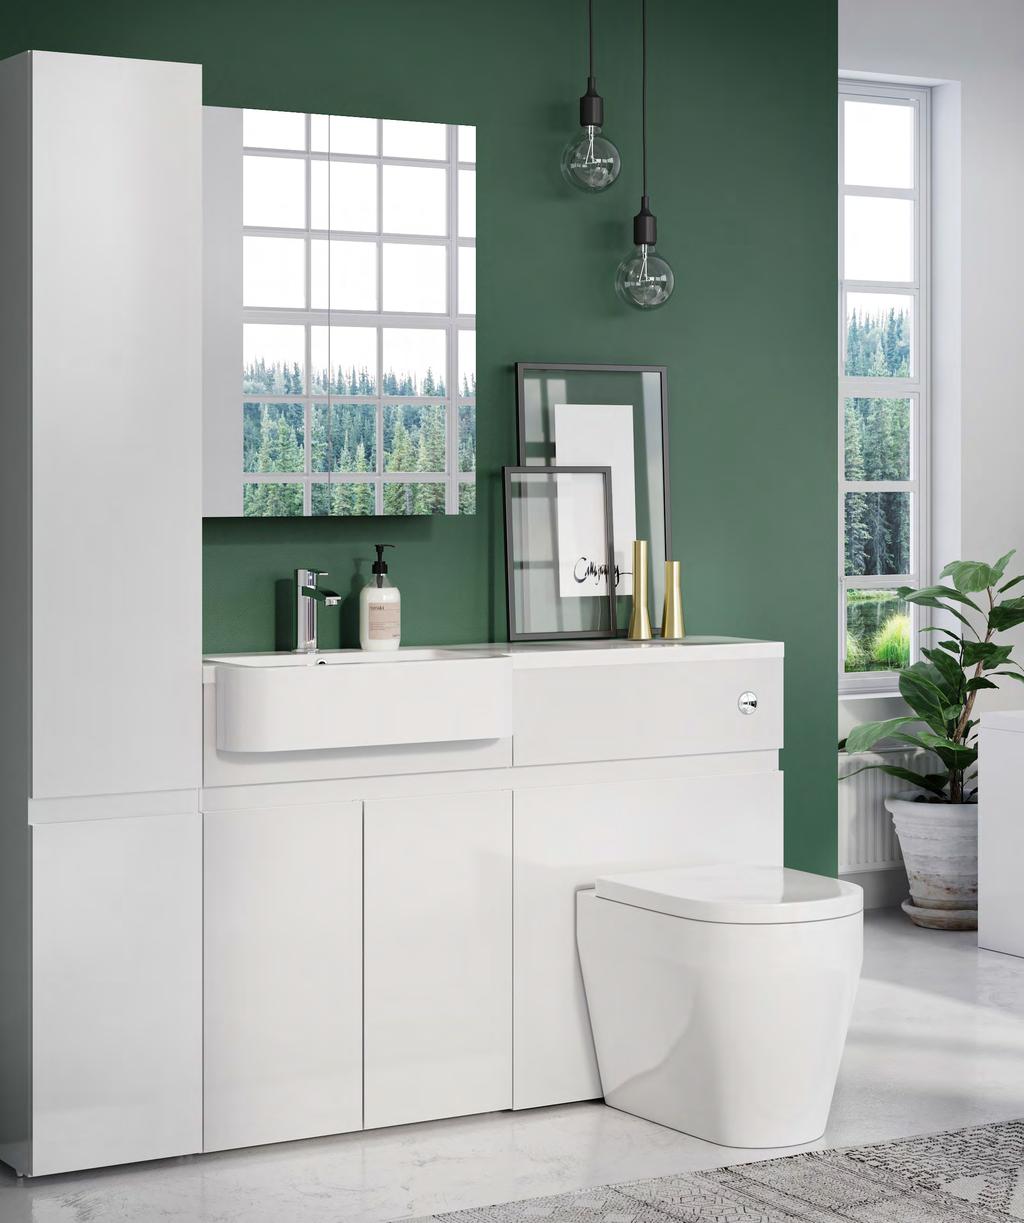 D30 FITTED FURNITURE FURNITURE THE ILLUSION OF SPACE A fitted bathroom with a straight line of base and wall cabinets covering one wall, often looks bigger than one with free-standing individual